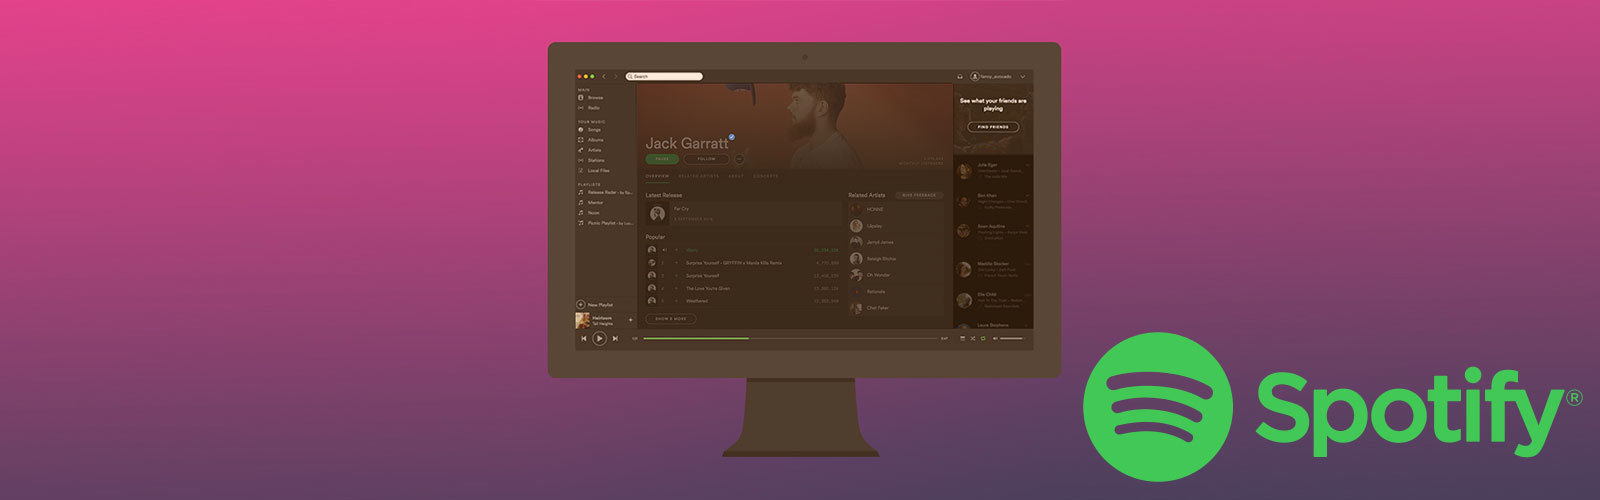 how to make spotify artist account